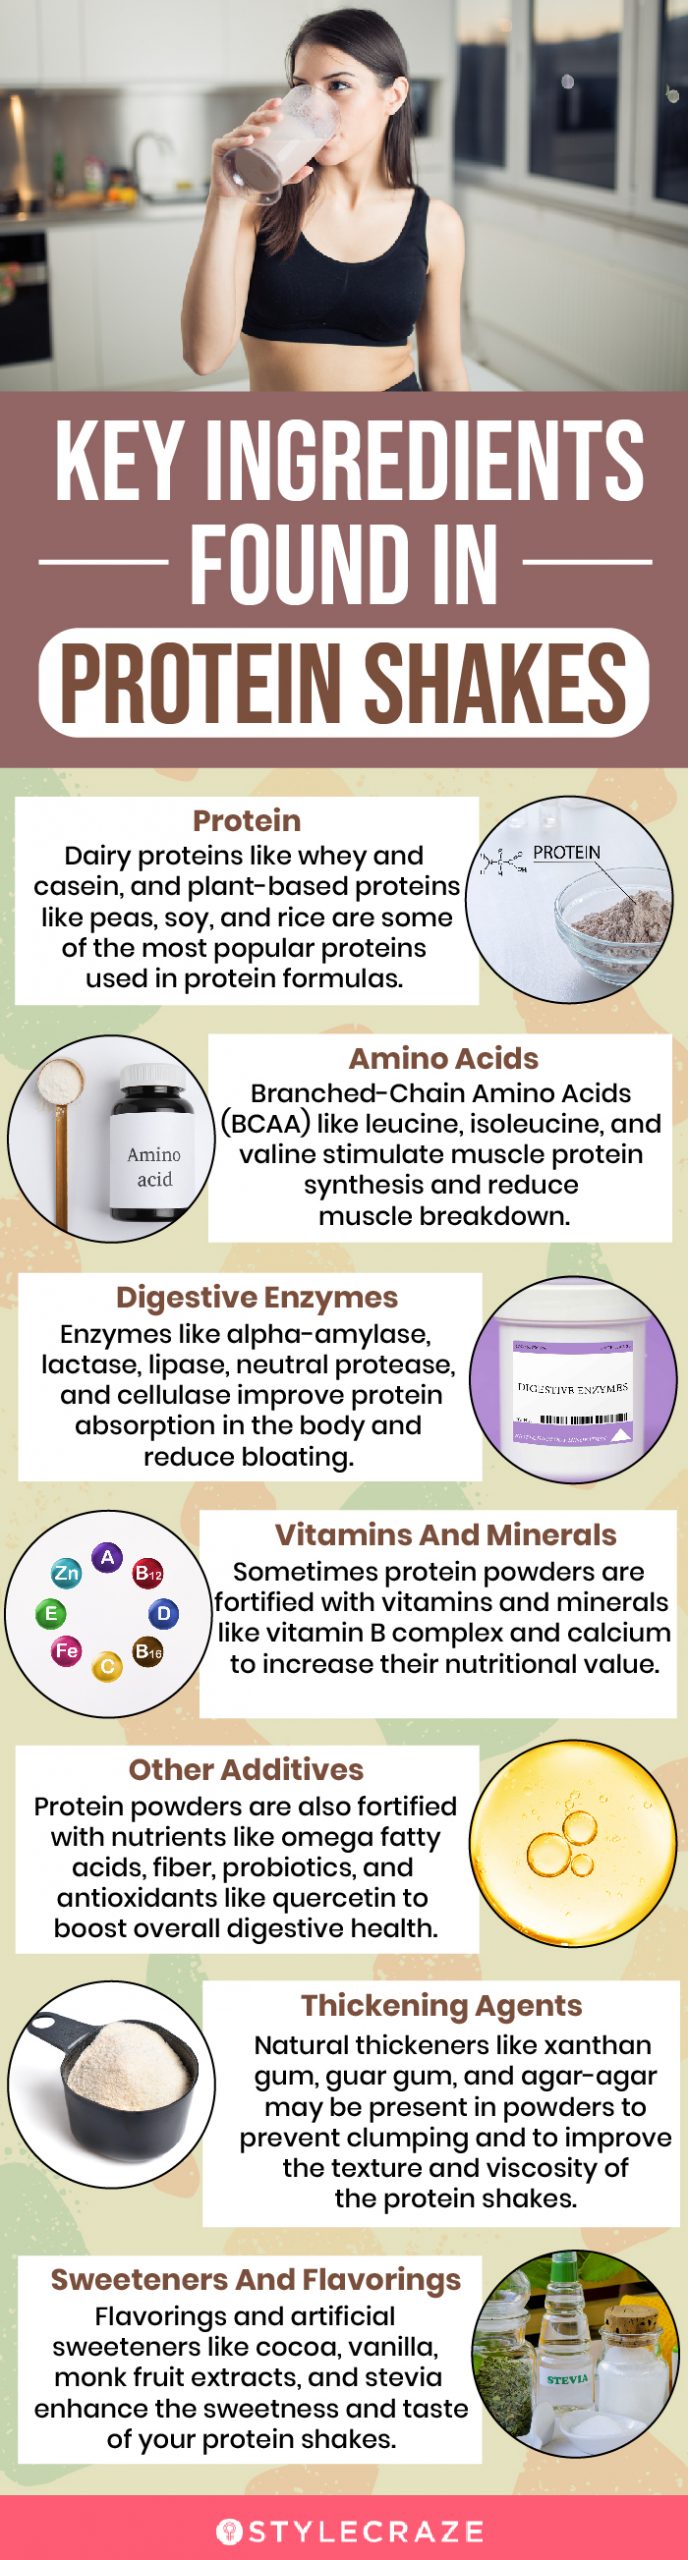 Key Ingredients Found In Protein Shakes (infographic)